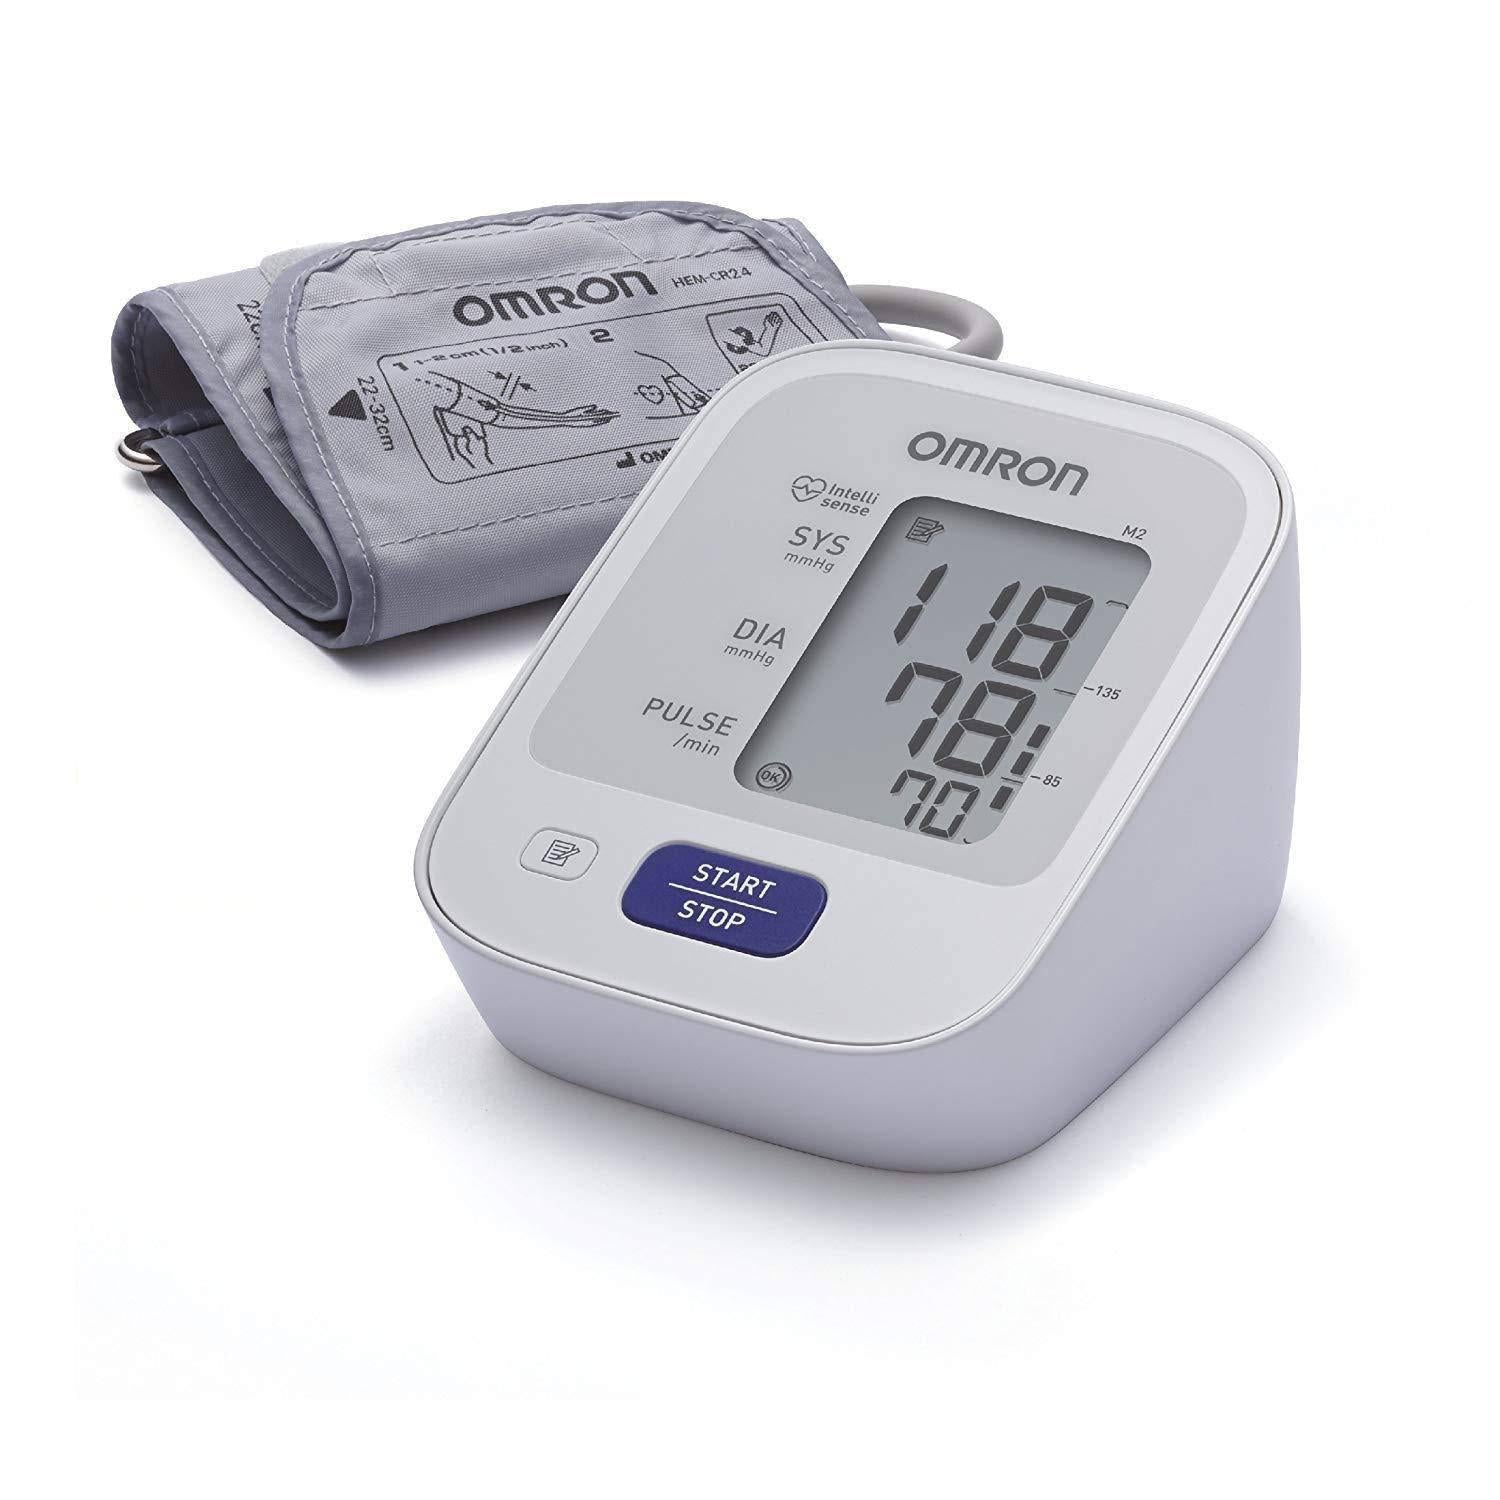 Omron M3 Comfort Automatic Upper Arm Blood Pressure Monitor 22